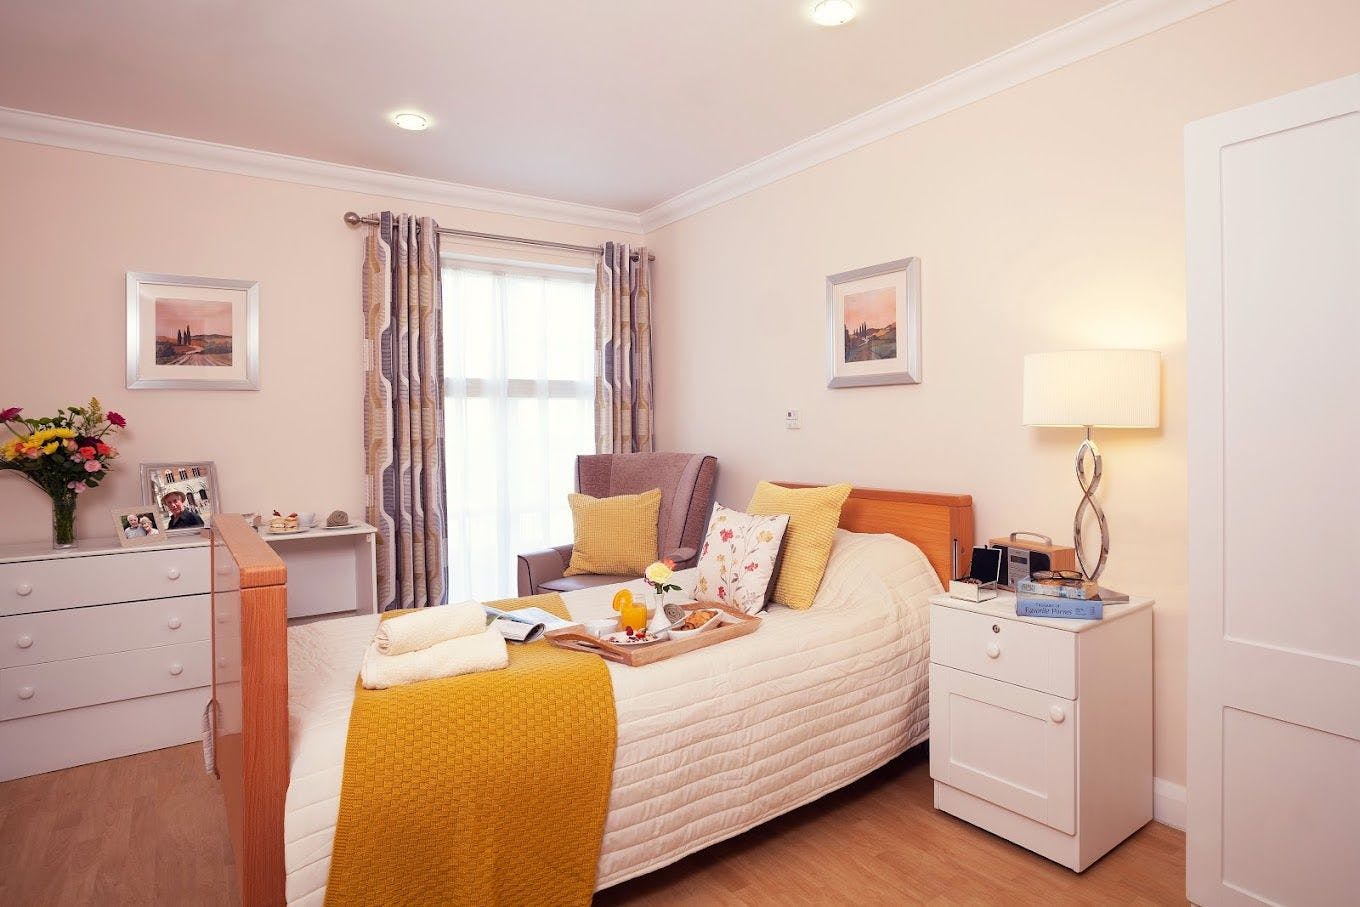 Bedroom of Albany Lodge care home in Croydon, London